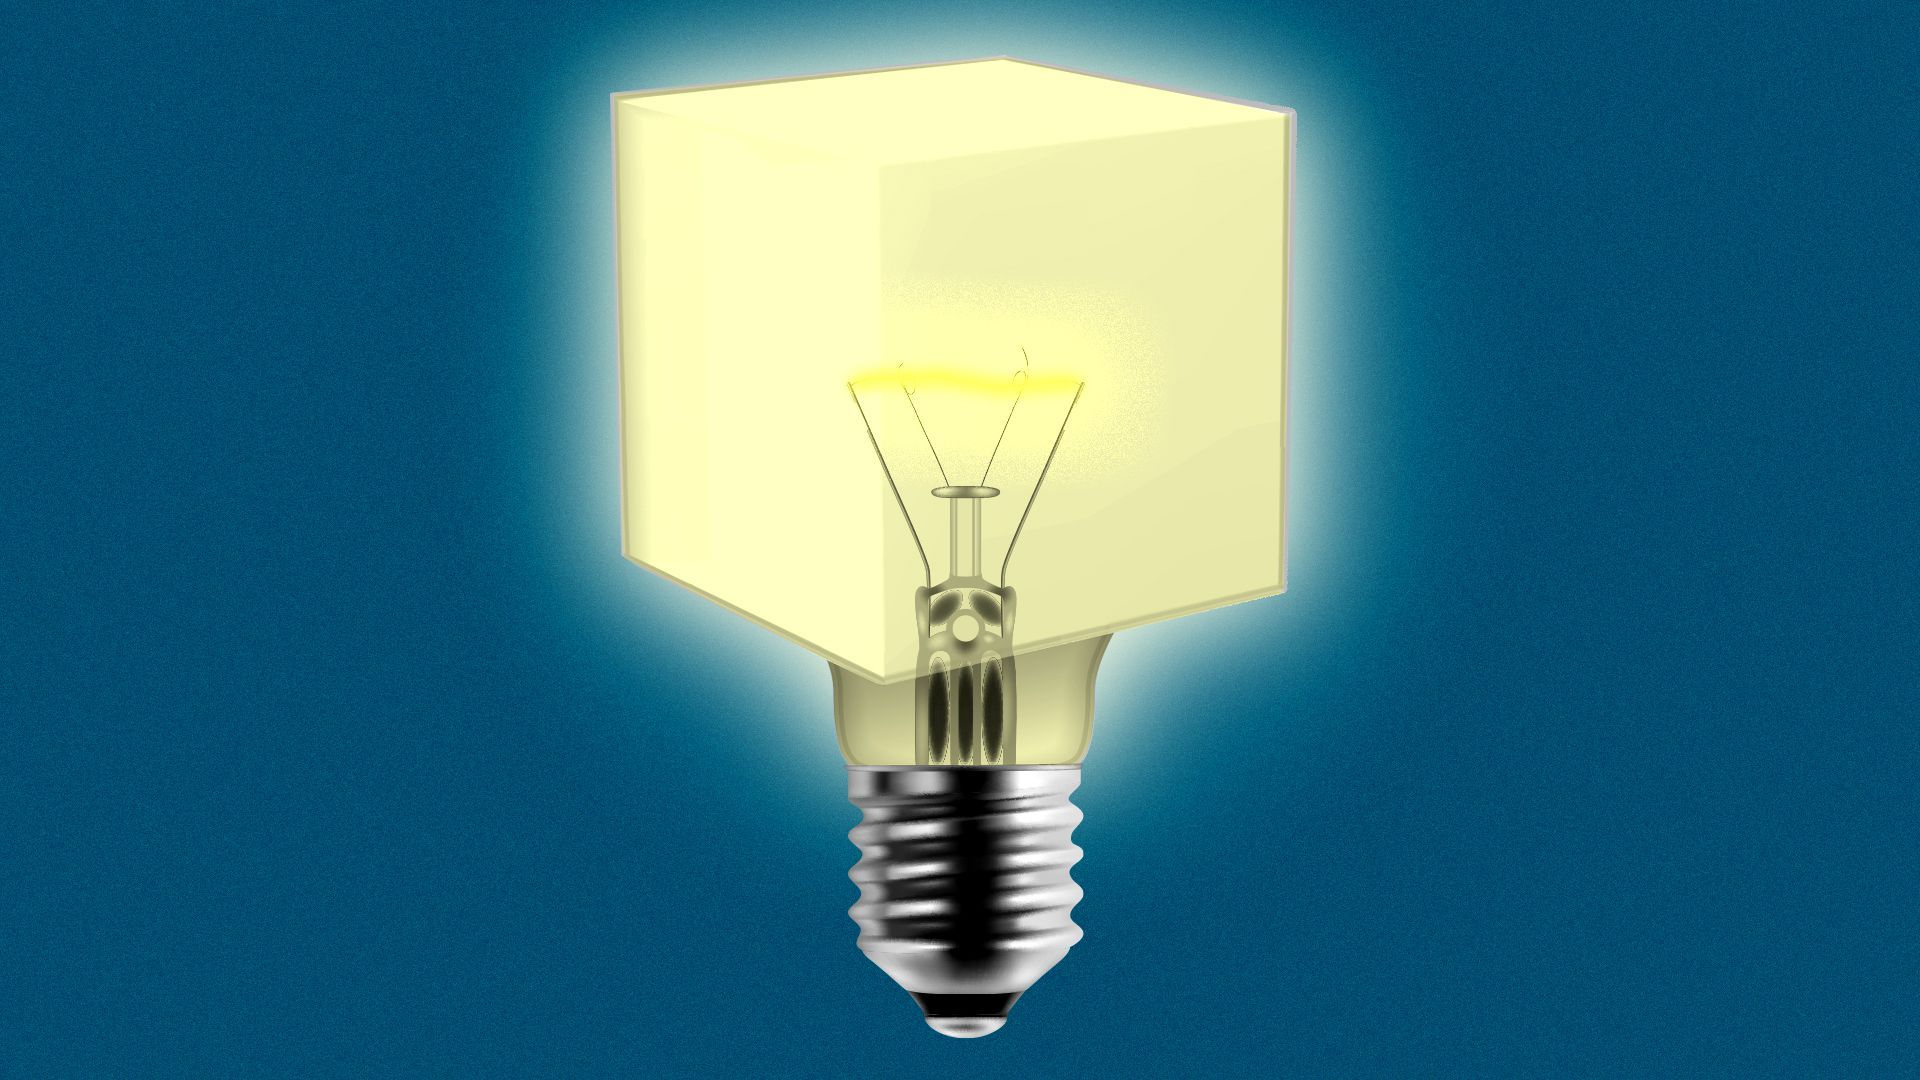 Illustration of a lit lightbulb with glass shaped like a cube